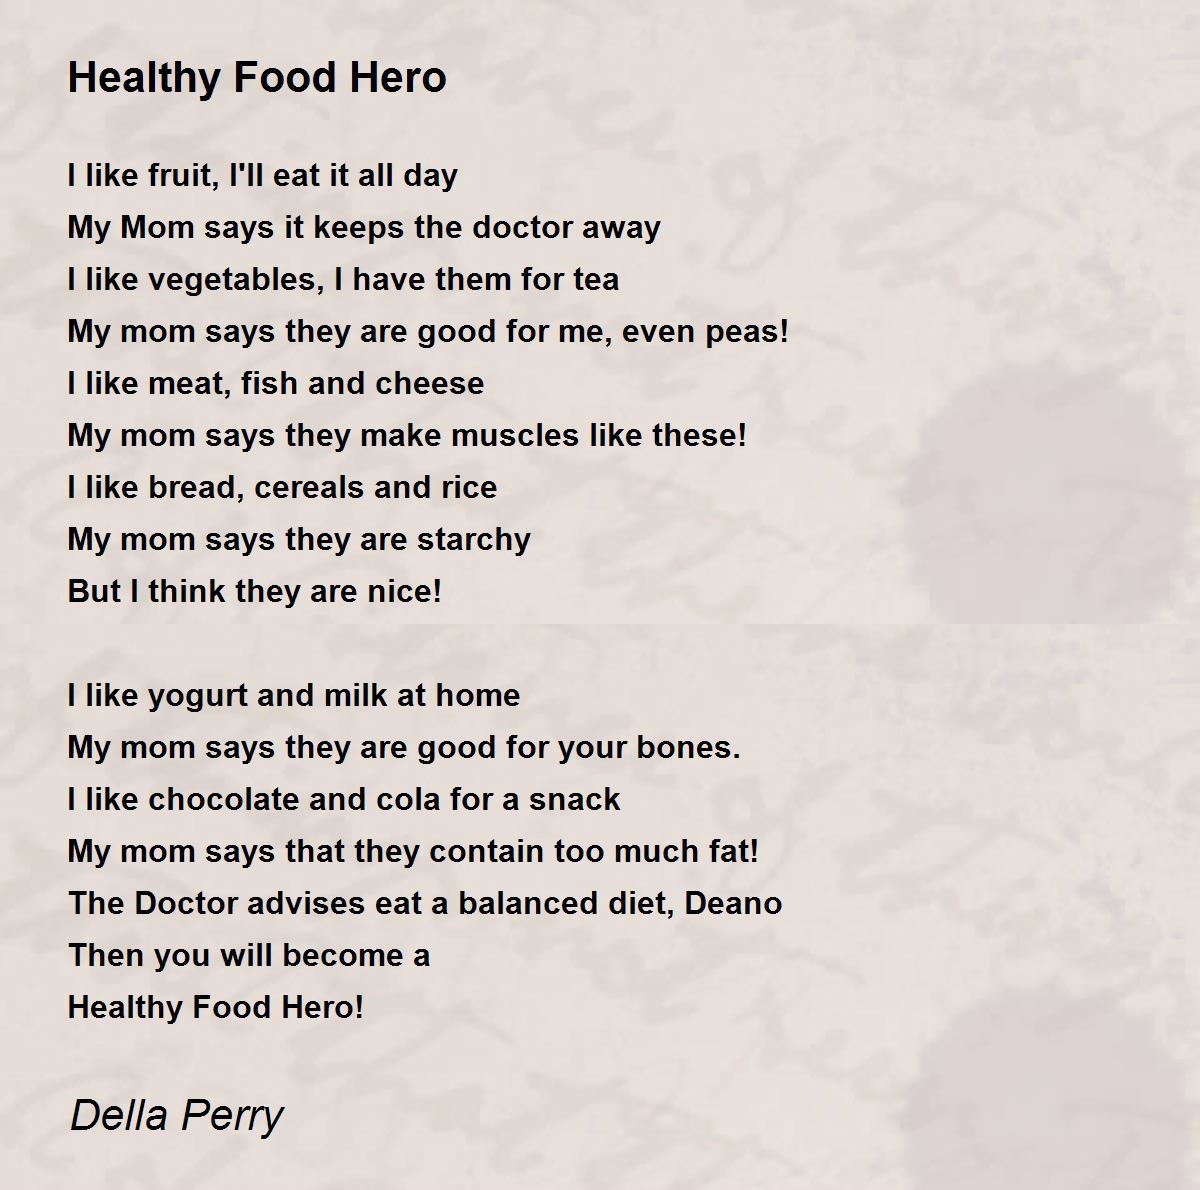 Eating Healthy Poems